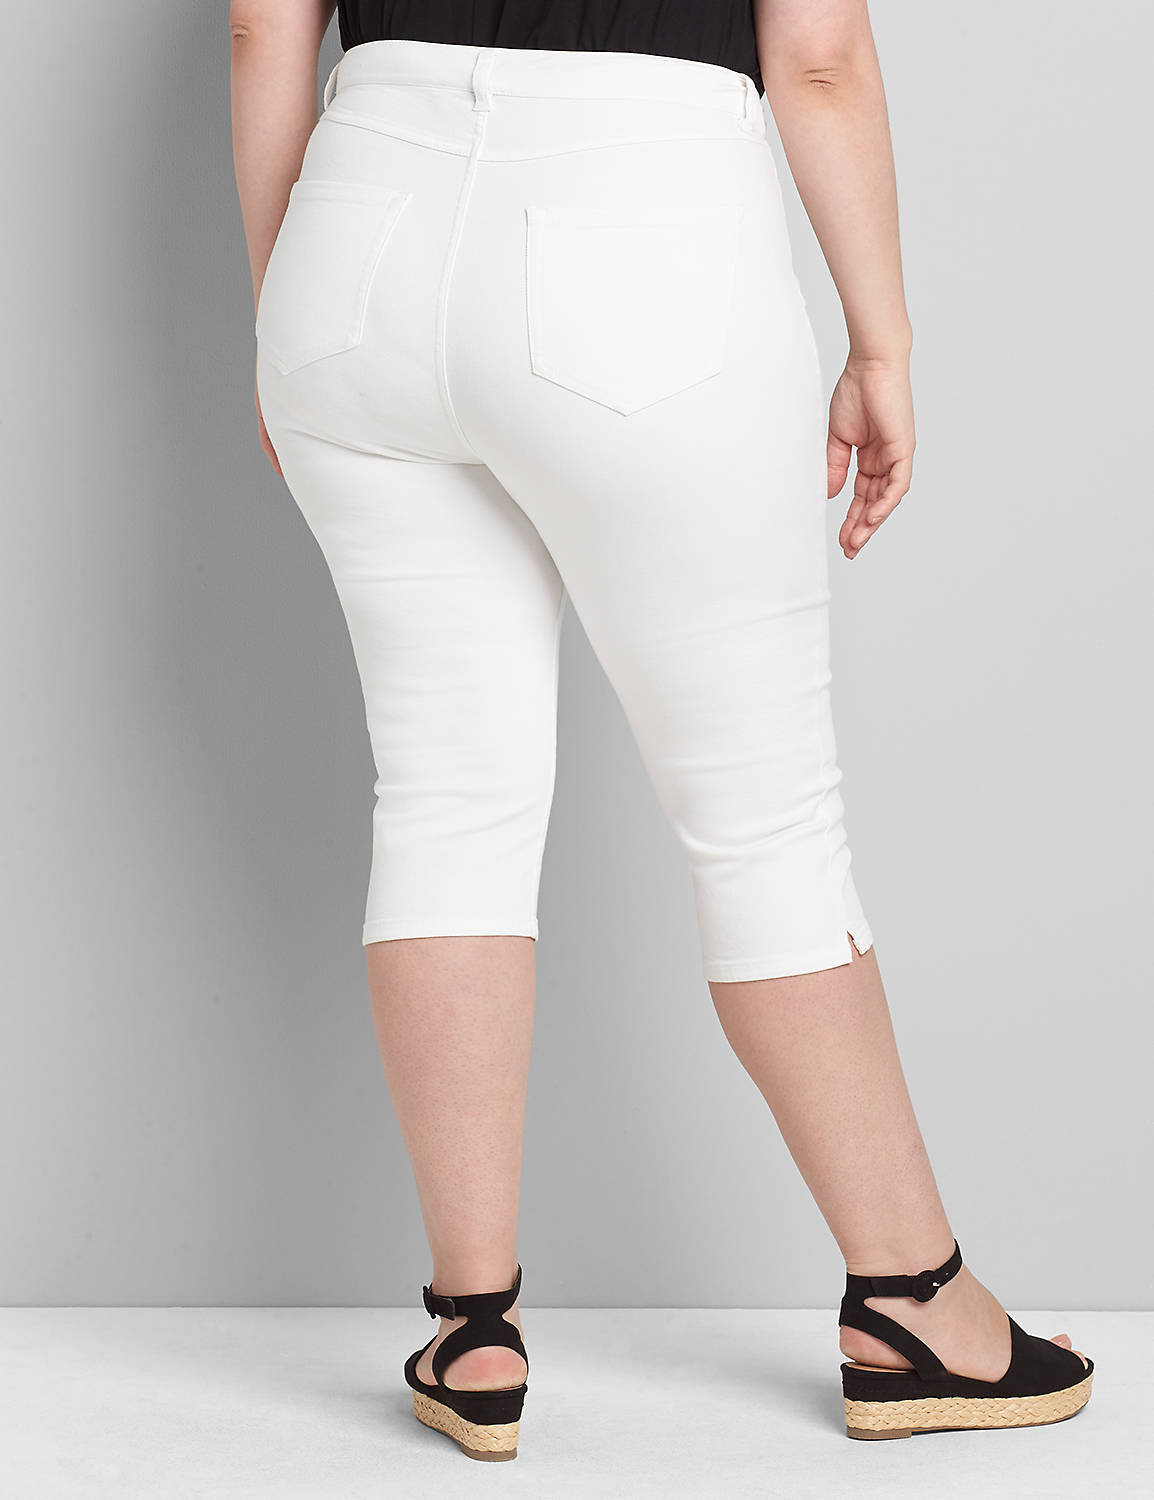 CURVY MID RISE SKINNY PEDAL PUSHER 19" - MICKEY TWILL 1119683:Ascena White:16 Product Image 2